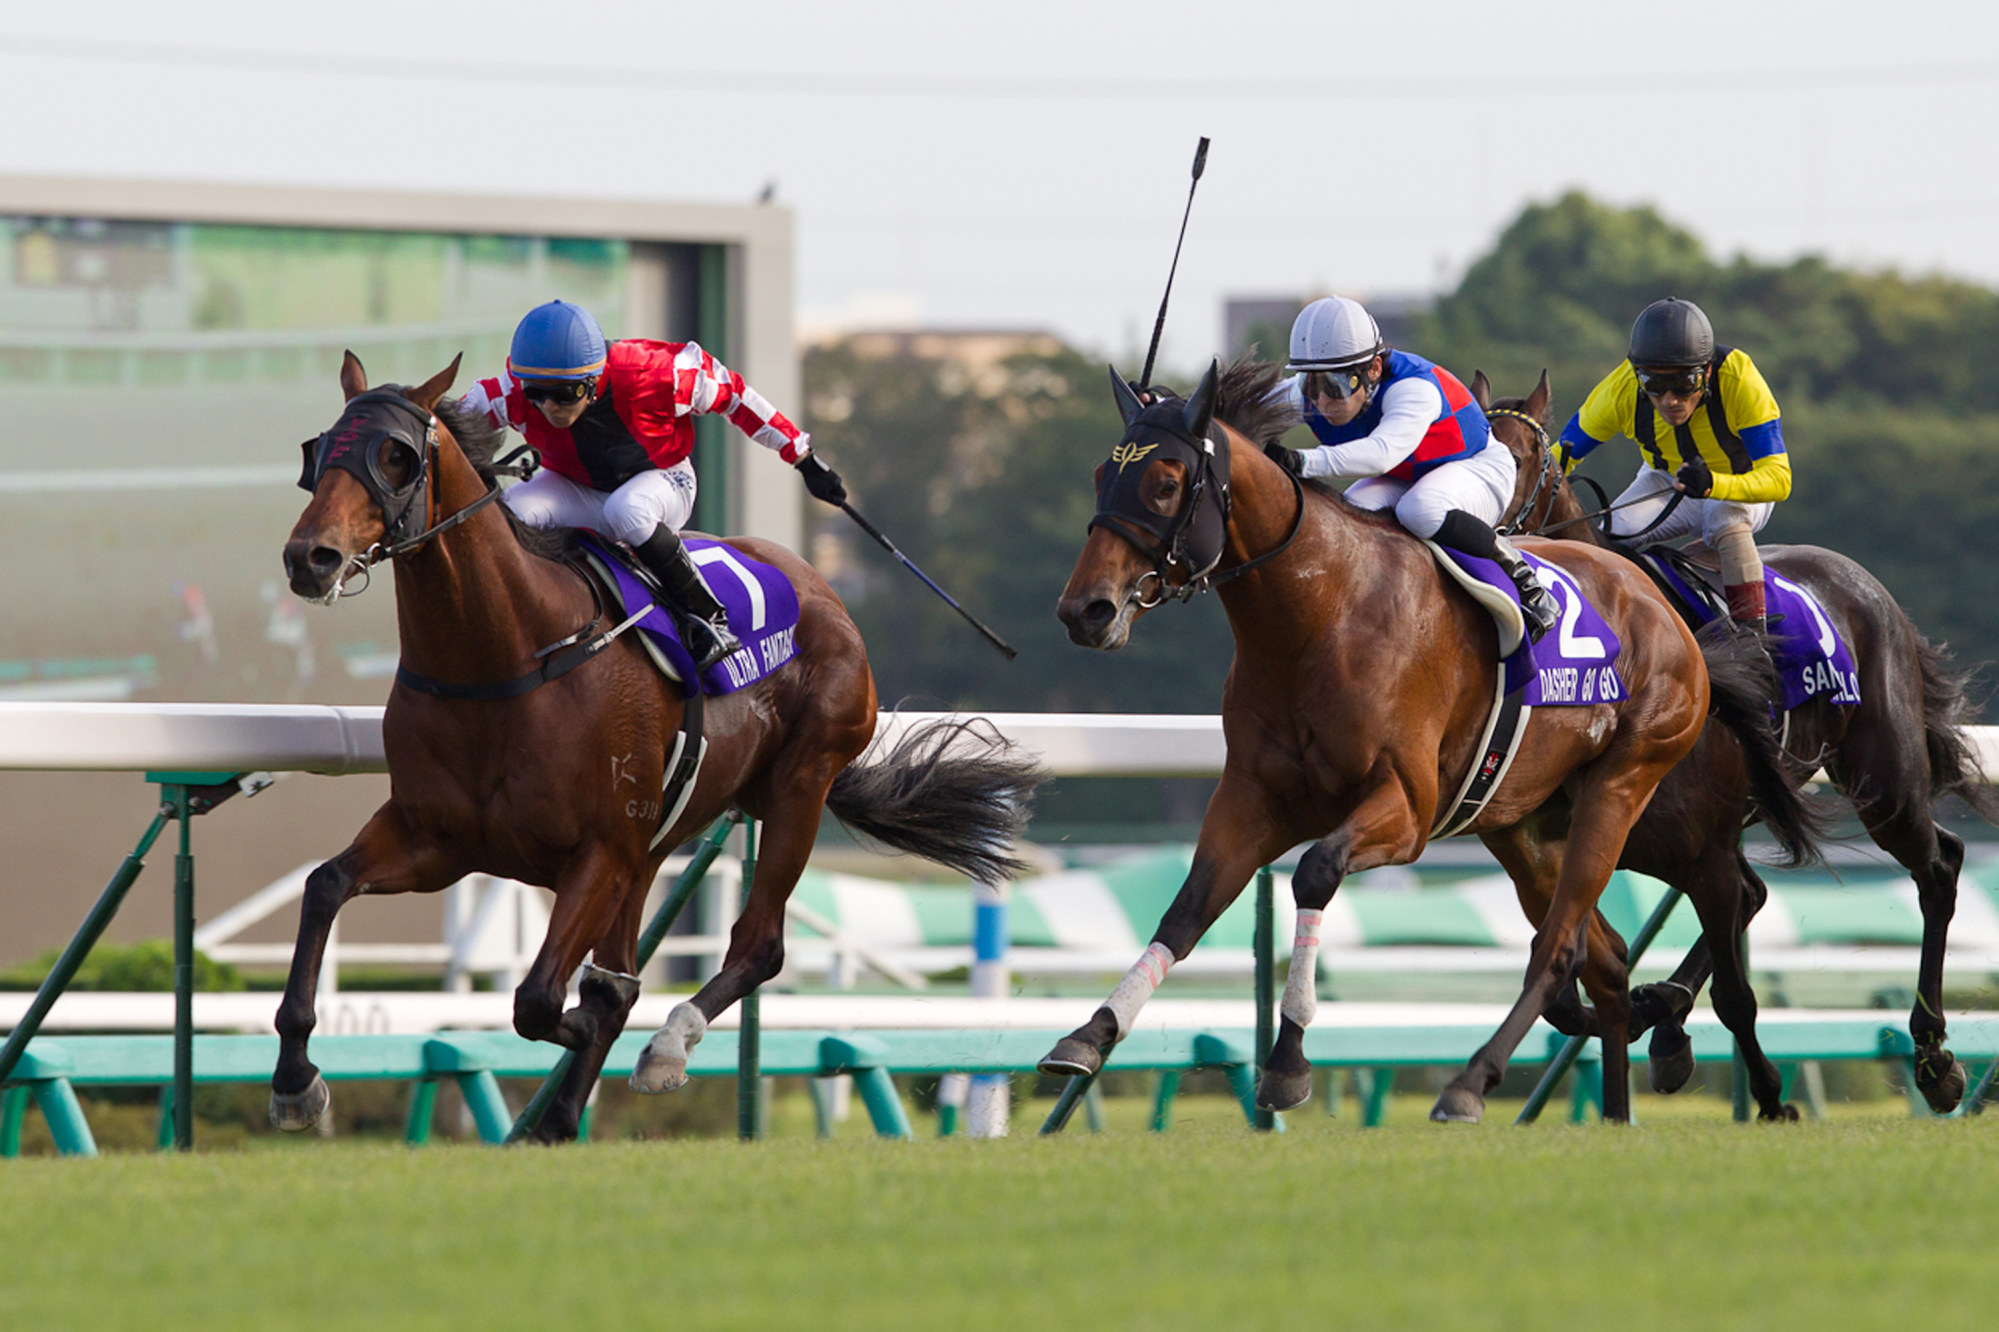 Alex Lai and Ultra Fantasy (left) win the 2010 Sprinters Stakes in Japan.